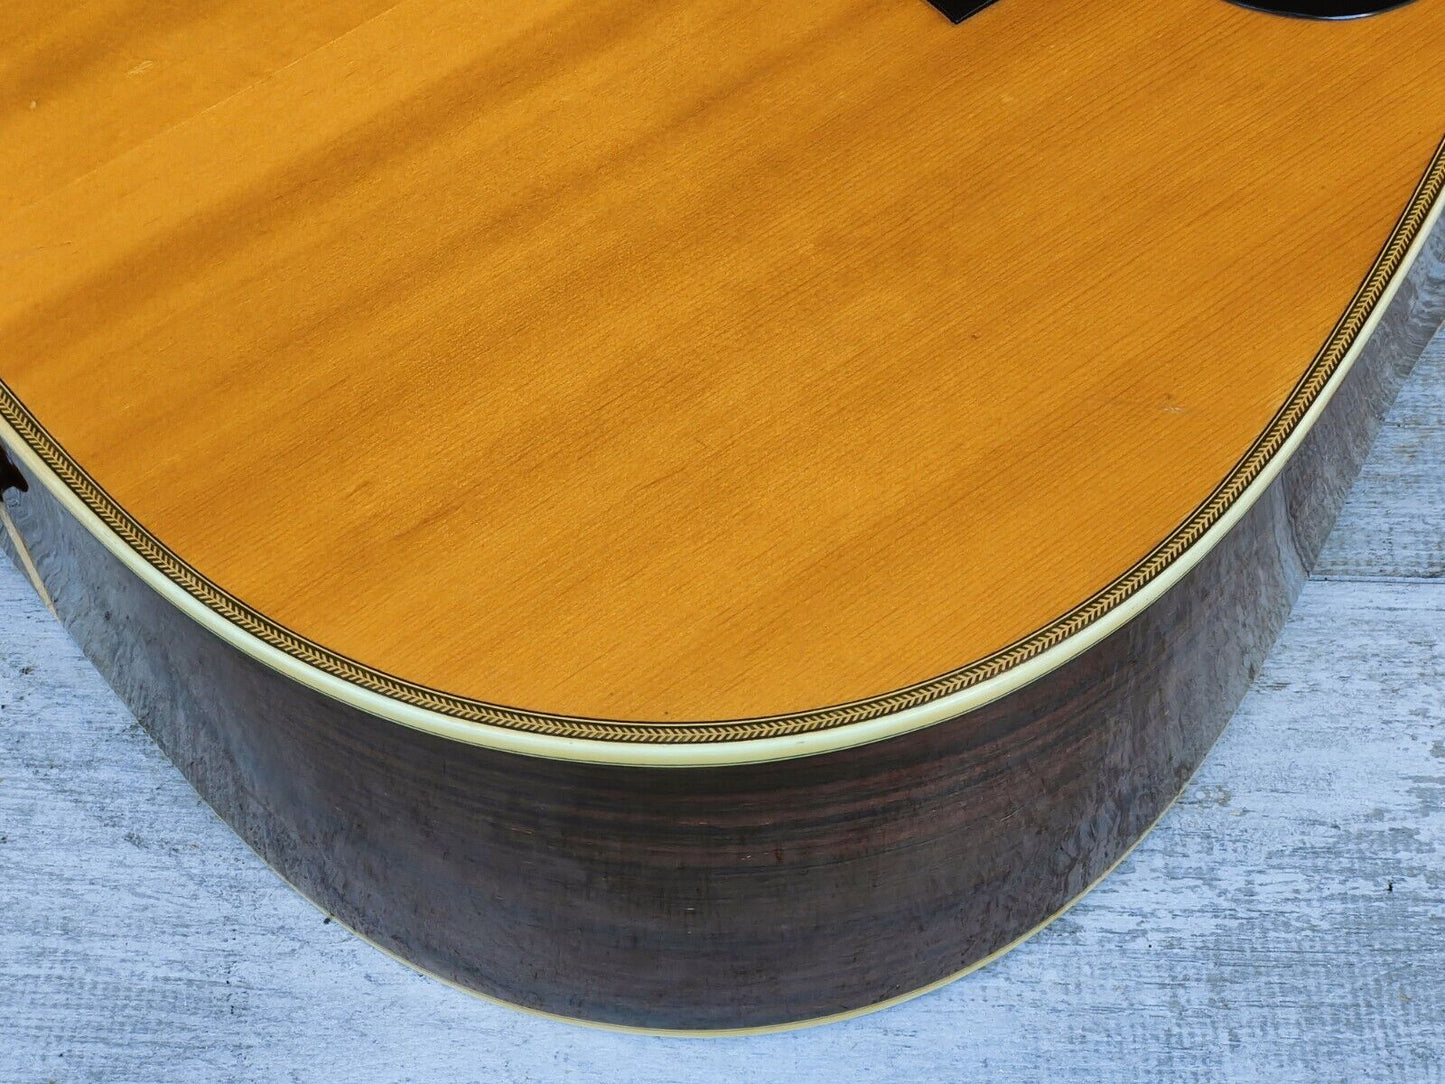 1980's Event (By Matsumoto Japan) Dreadnought Acoustic Guitar (Natural)